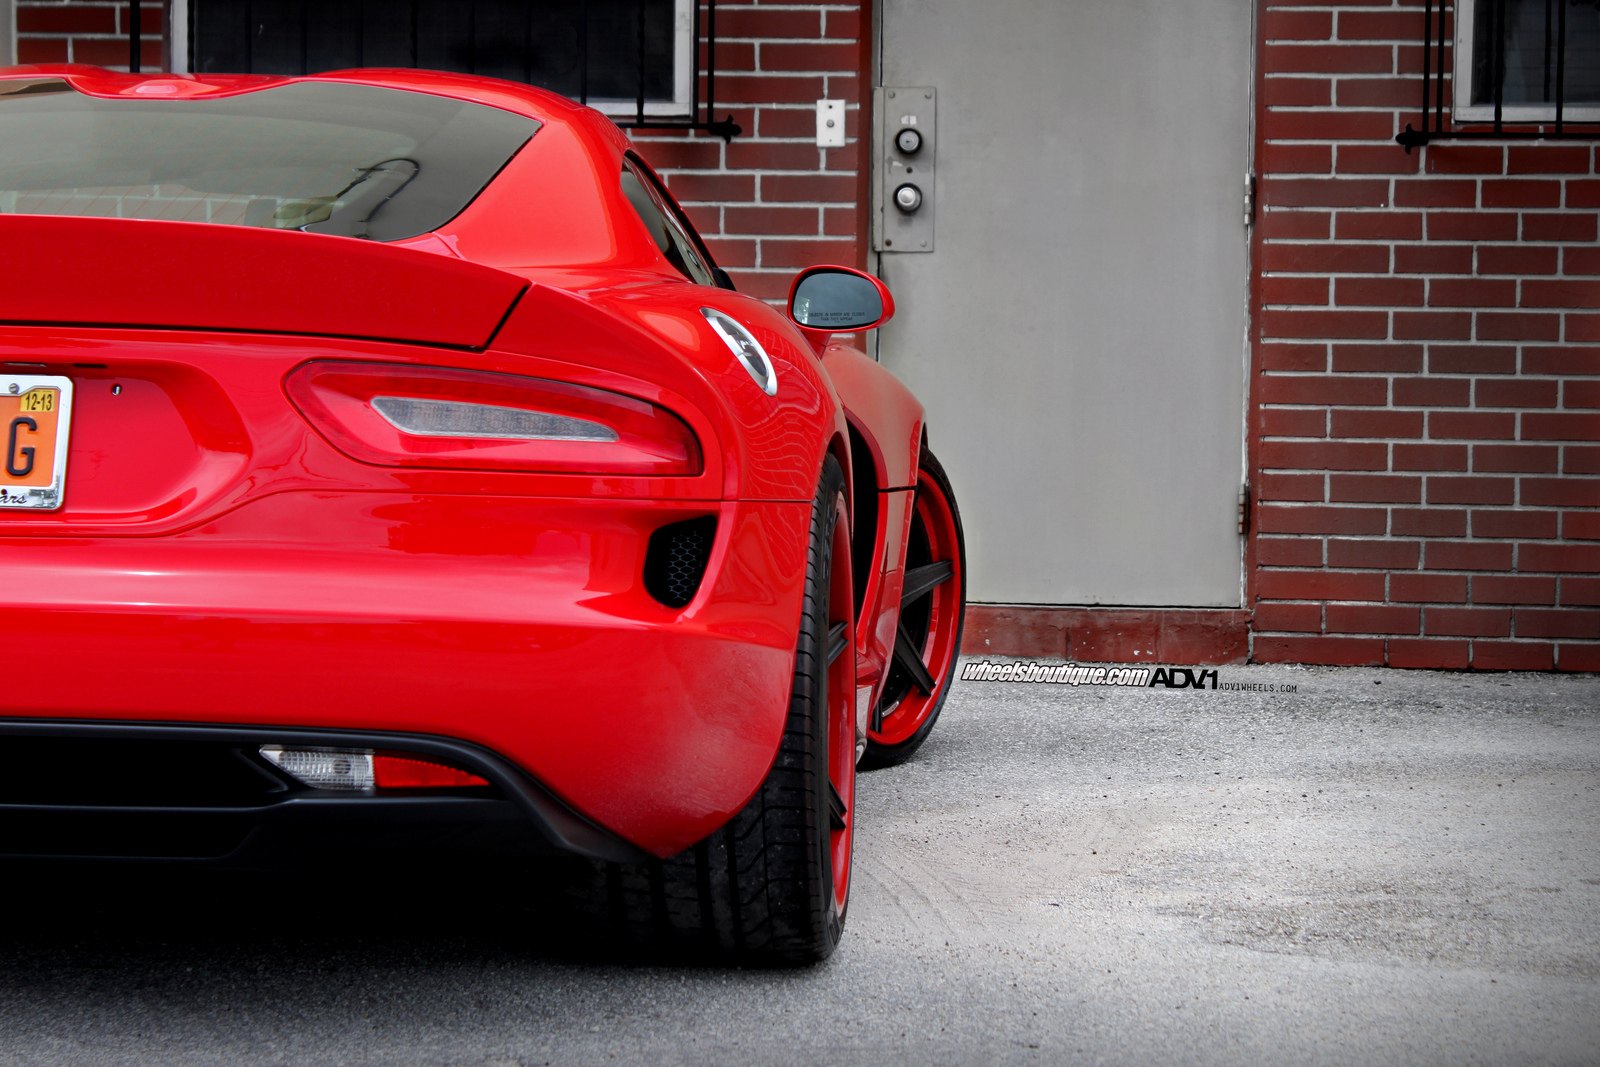 Aftermarket Taillights on Red Dodge Viper - Photo by ADV.1